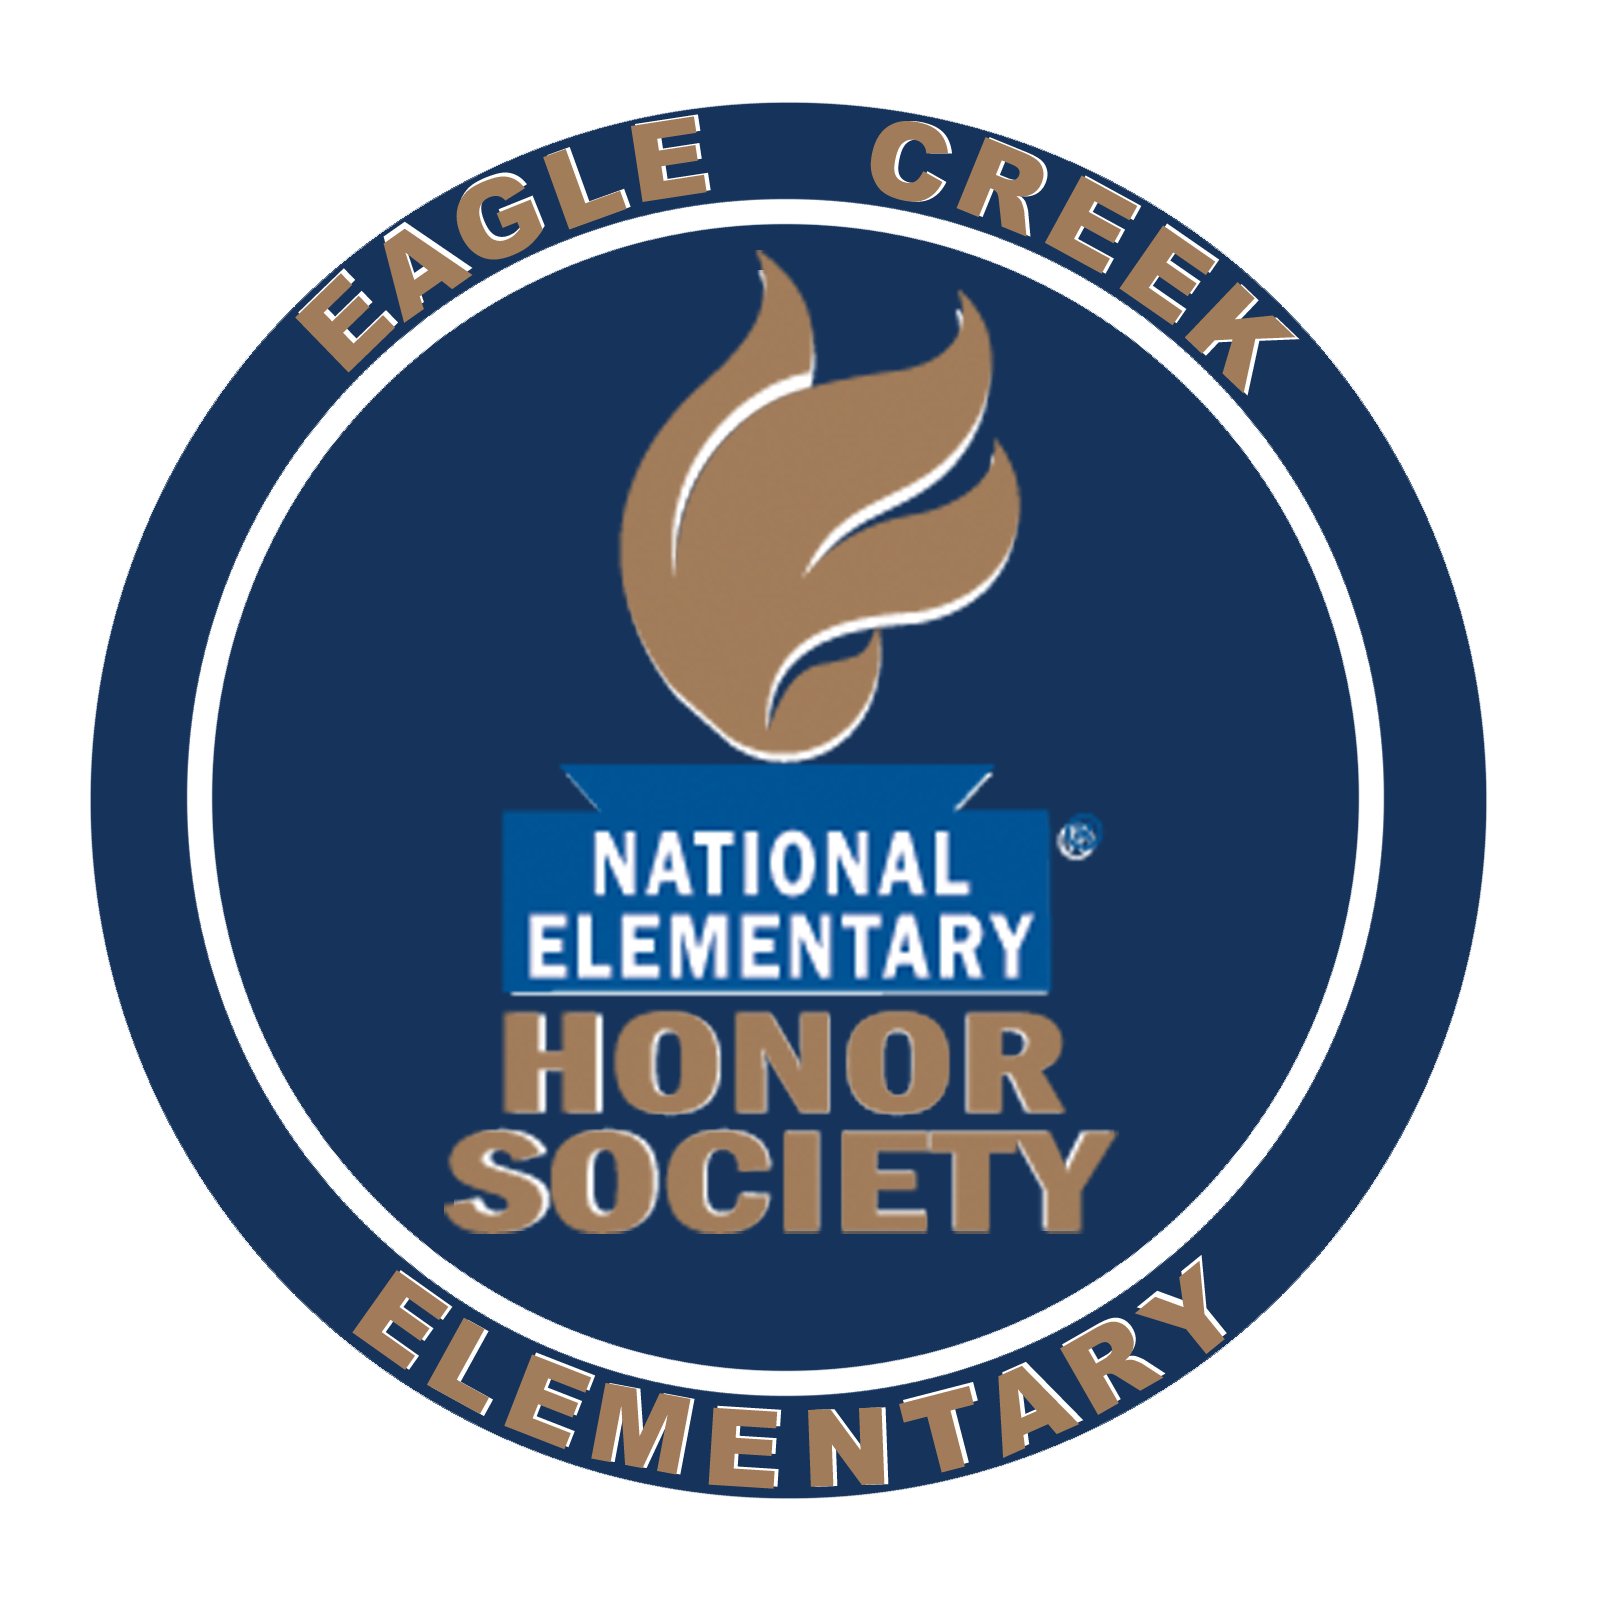 This is the official twitter account for Eagle Creek Elementary National Elementary Honor Society in Orlando, FL